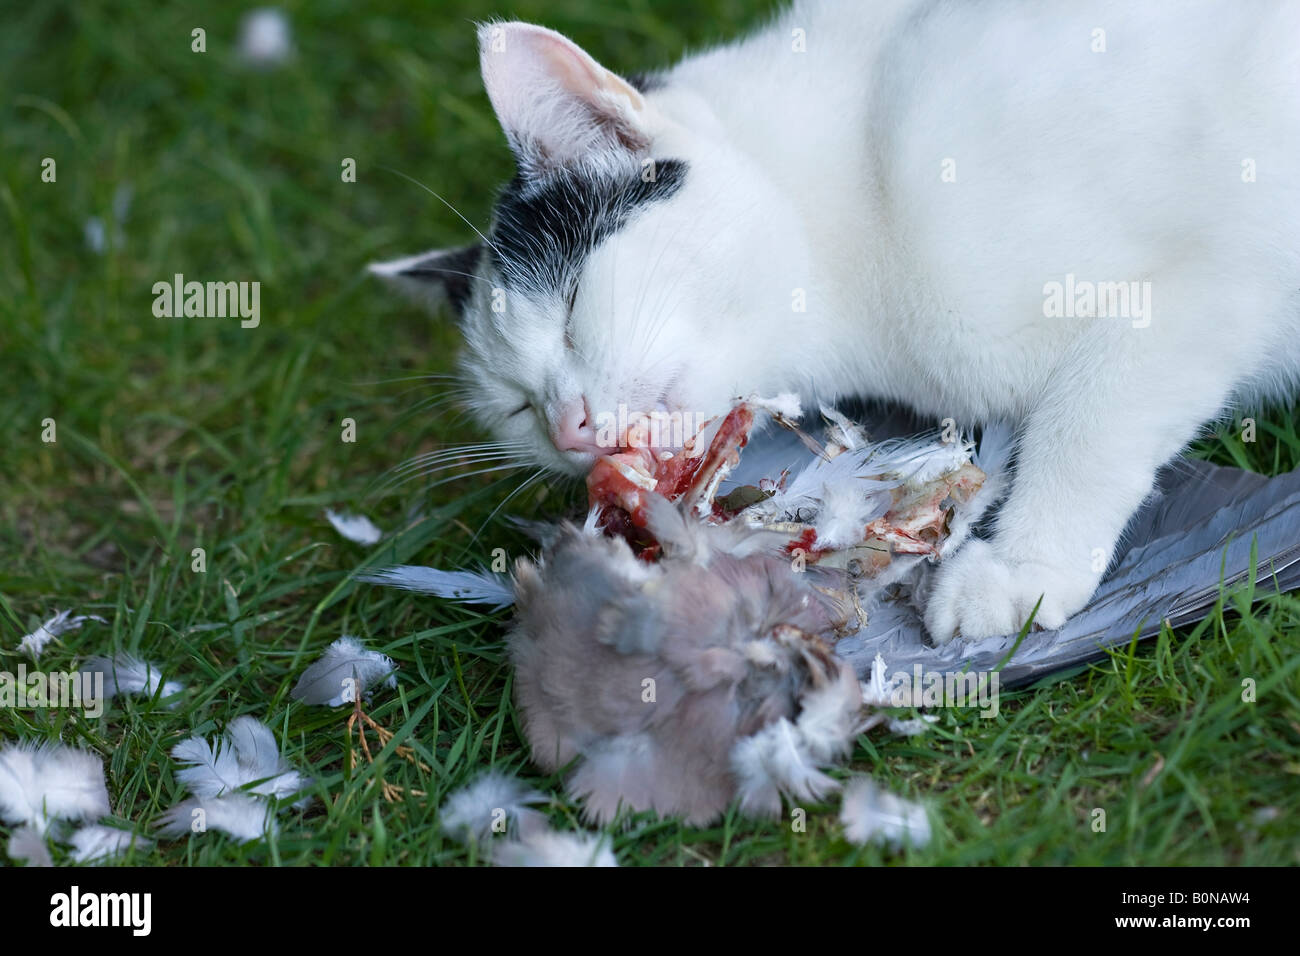 Young domestic black and white cat (Felis catus) eating a dead pigeon Stock Photo